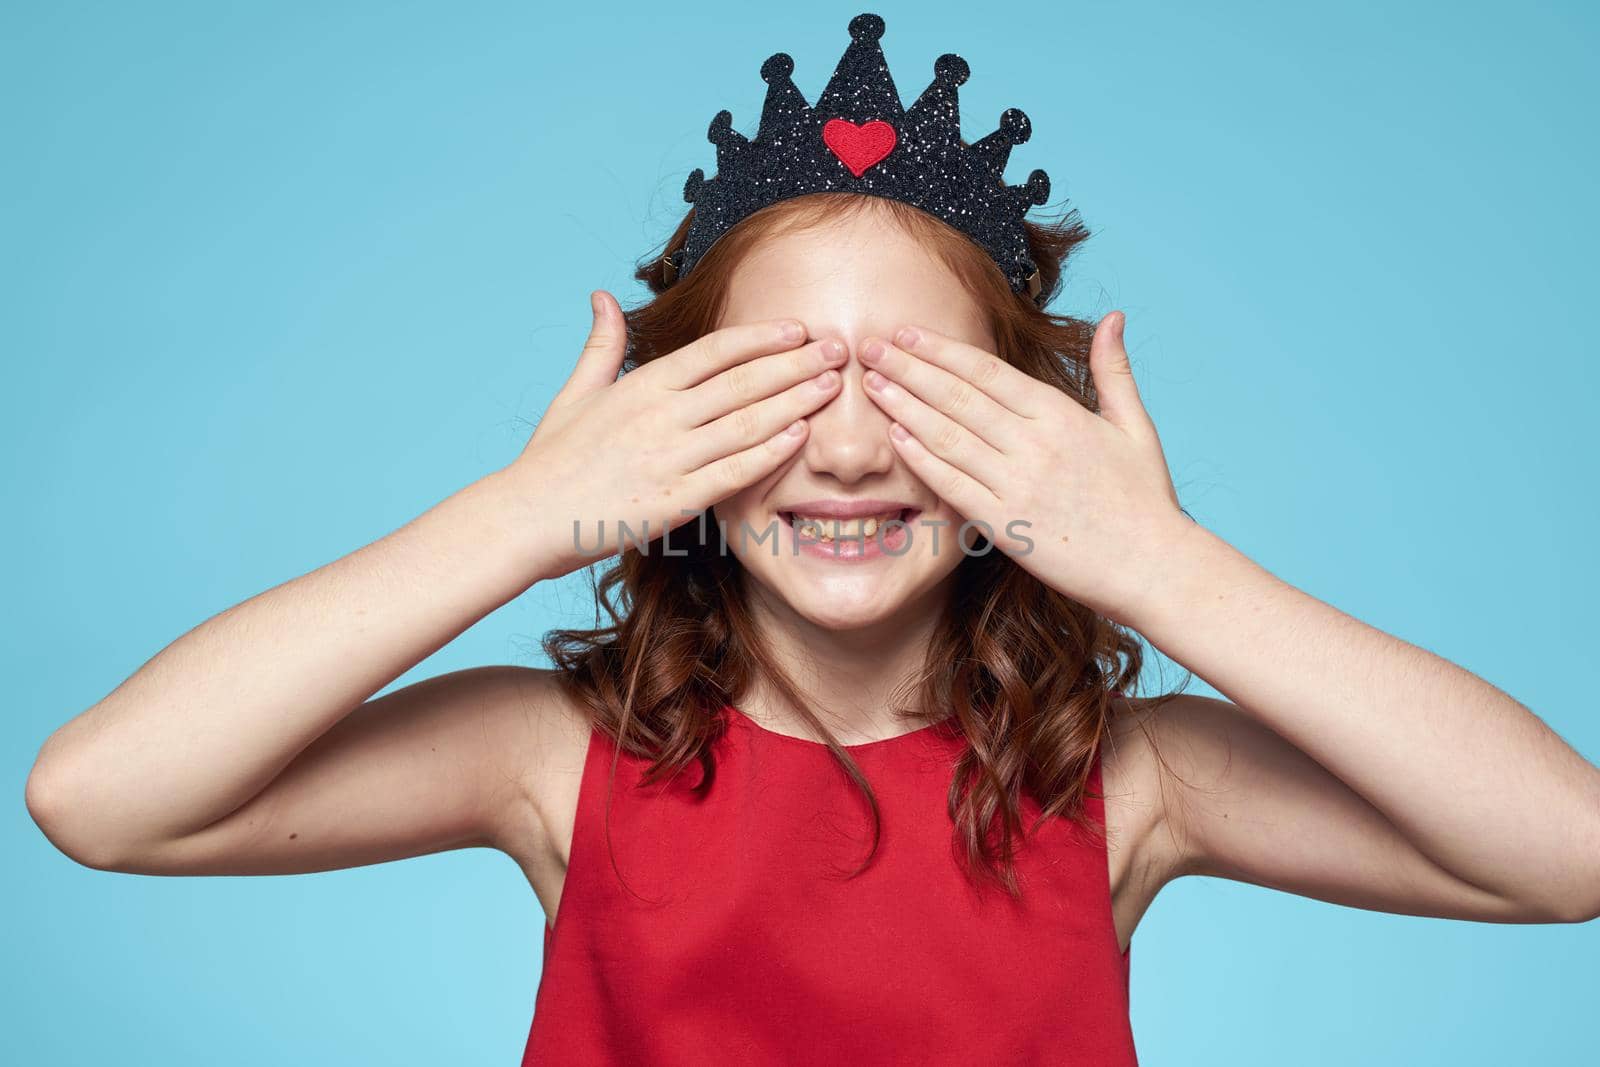 Girl with curly hair with a crown on her head red dress lifestyle blue background. High quality photo